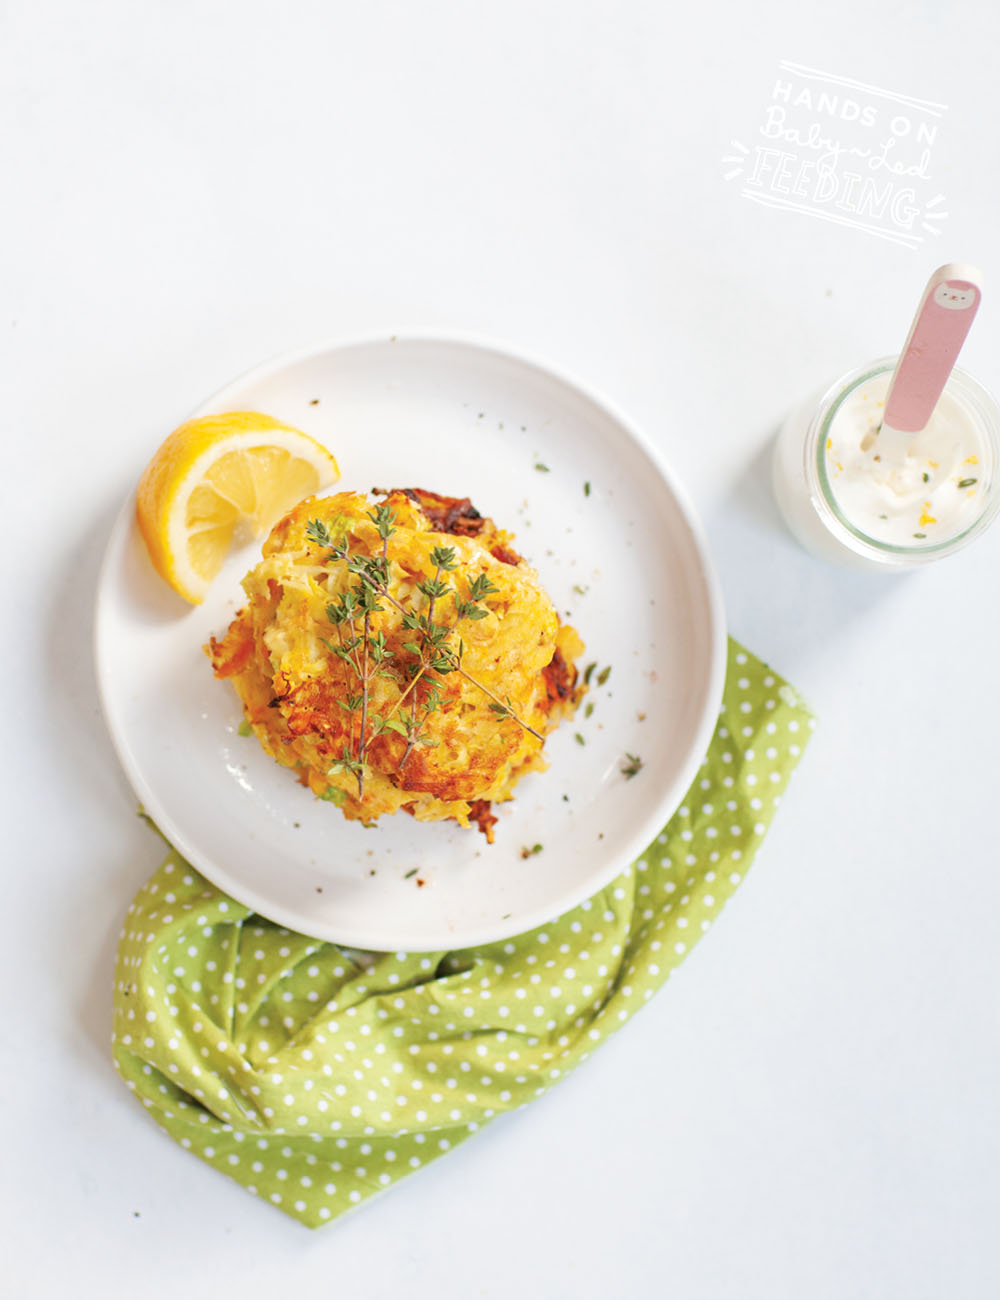 Freezer friendly healthy hash browns loaded with veggies! Easy healthy finger food appetizer or side dish for baby-led weaning. #hashbrown #fingerfood #hiddenveggies #pickyeaters #freezerfriendly #babyledweaning #babyledfeeding #cabbagerecipes #carrots #potatoes